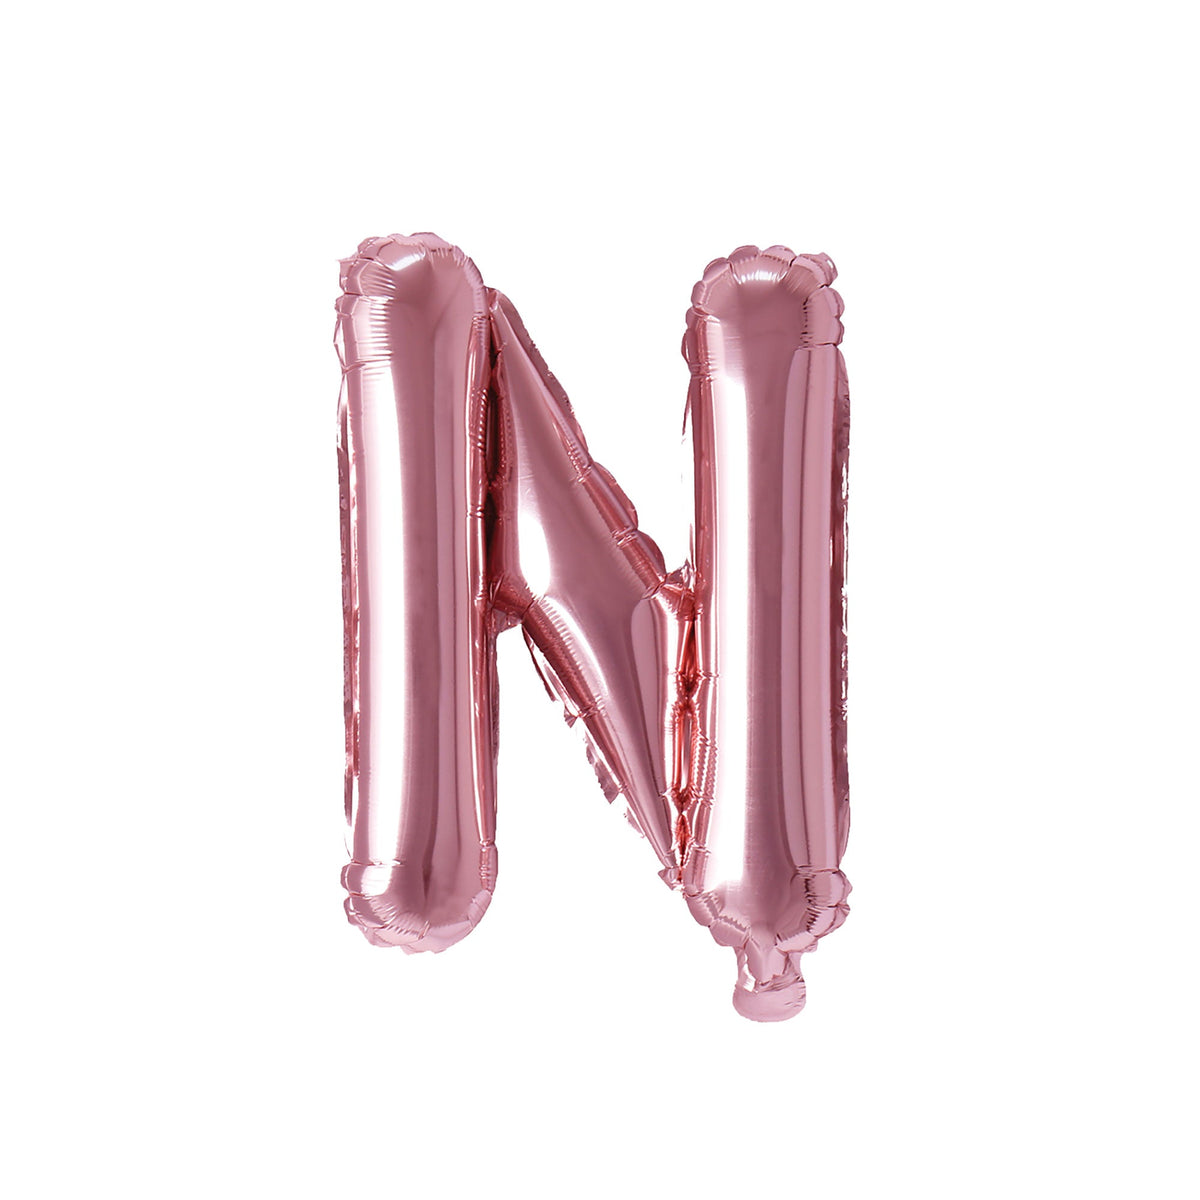 PARTY EXPERT Balloons Rose Gold Letter N Foil Balloon, 16 Inches, 1 Count 810064194320